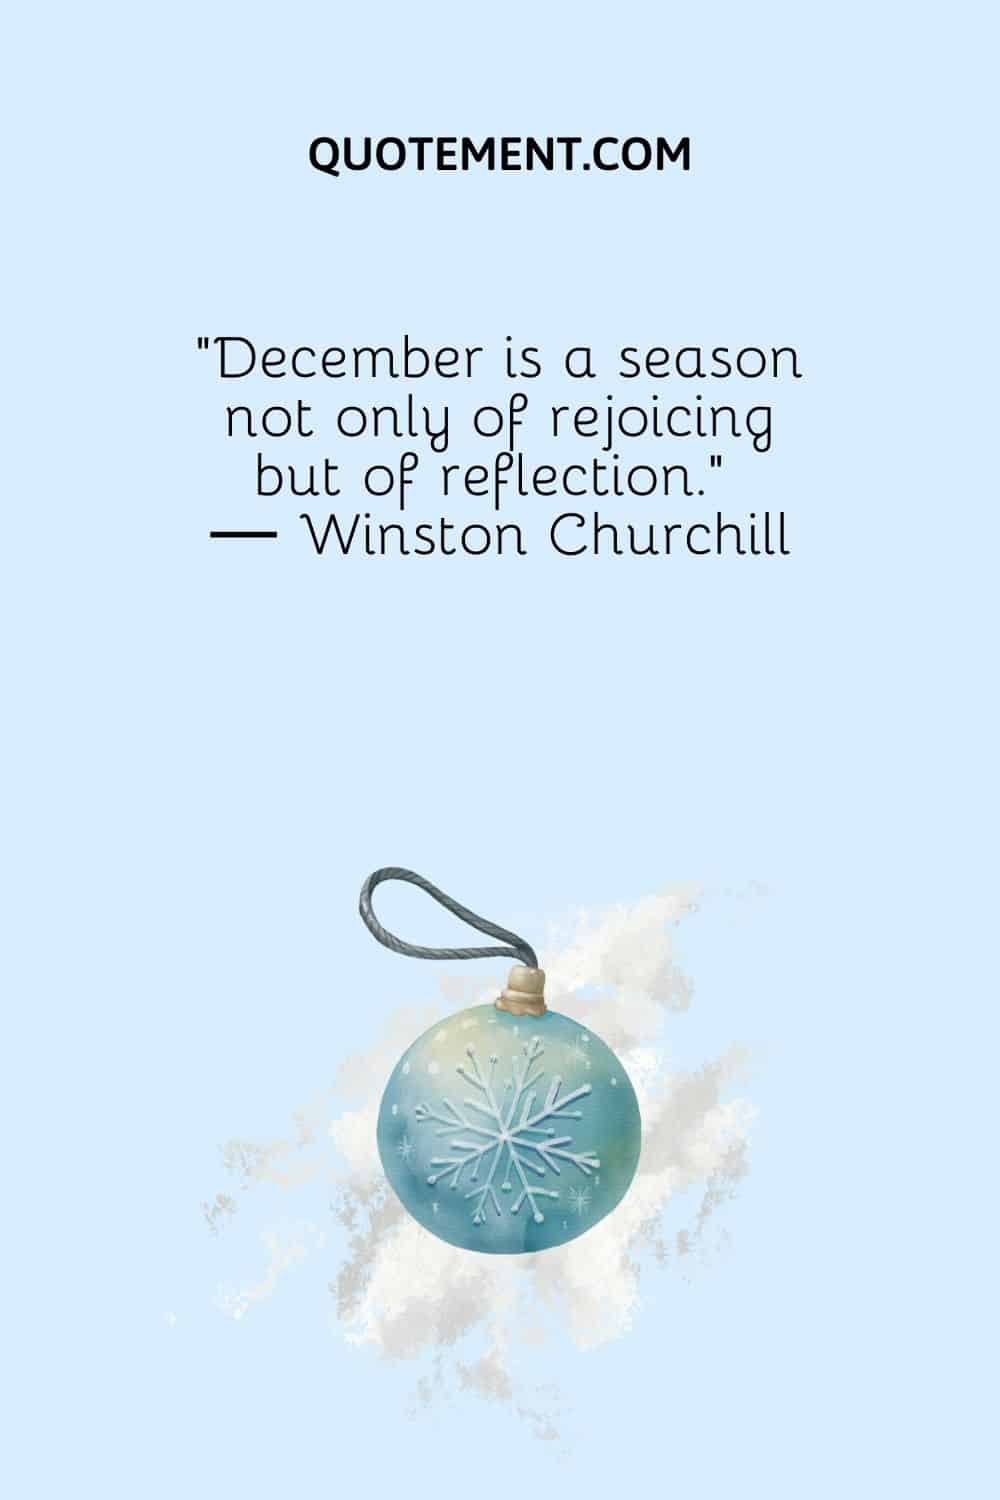 “December is a season not only of rejoicing but of reflection.” ― Winston Churchill